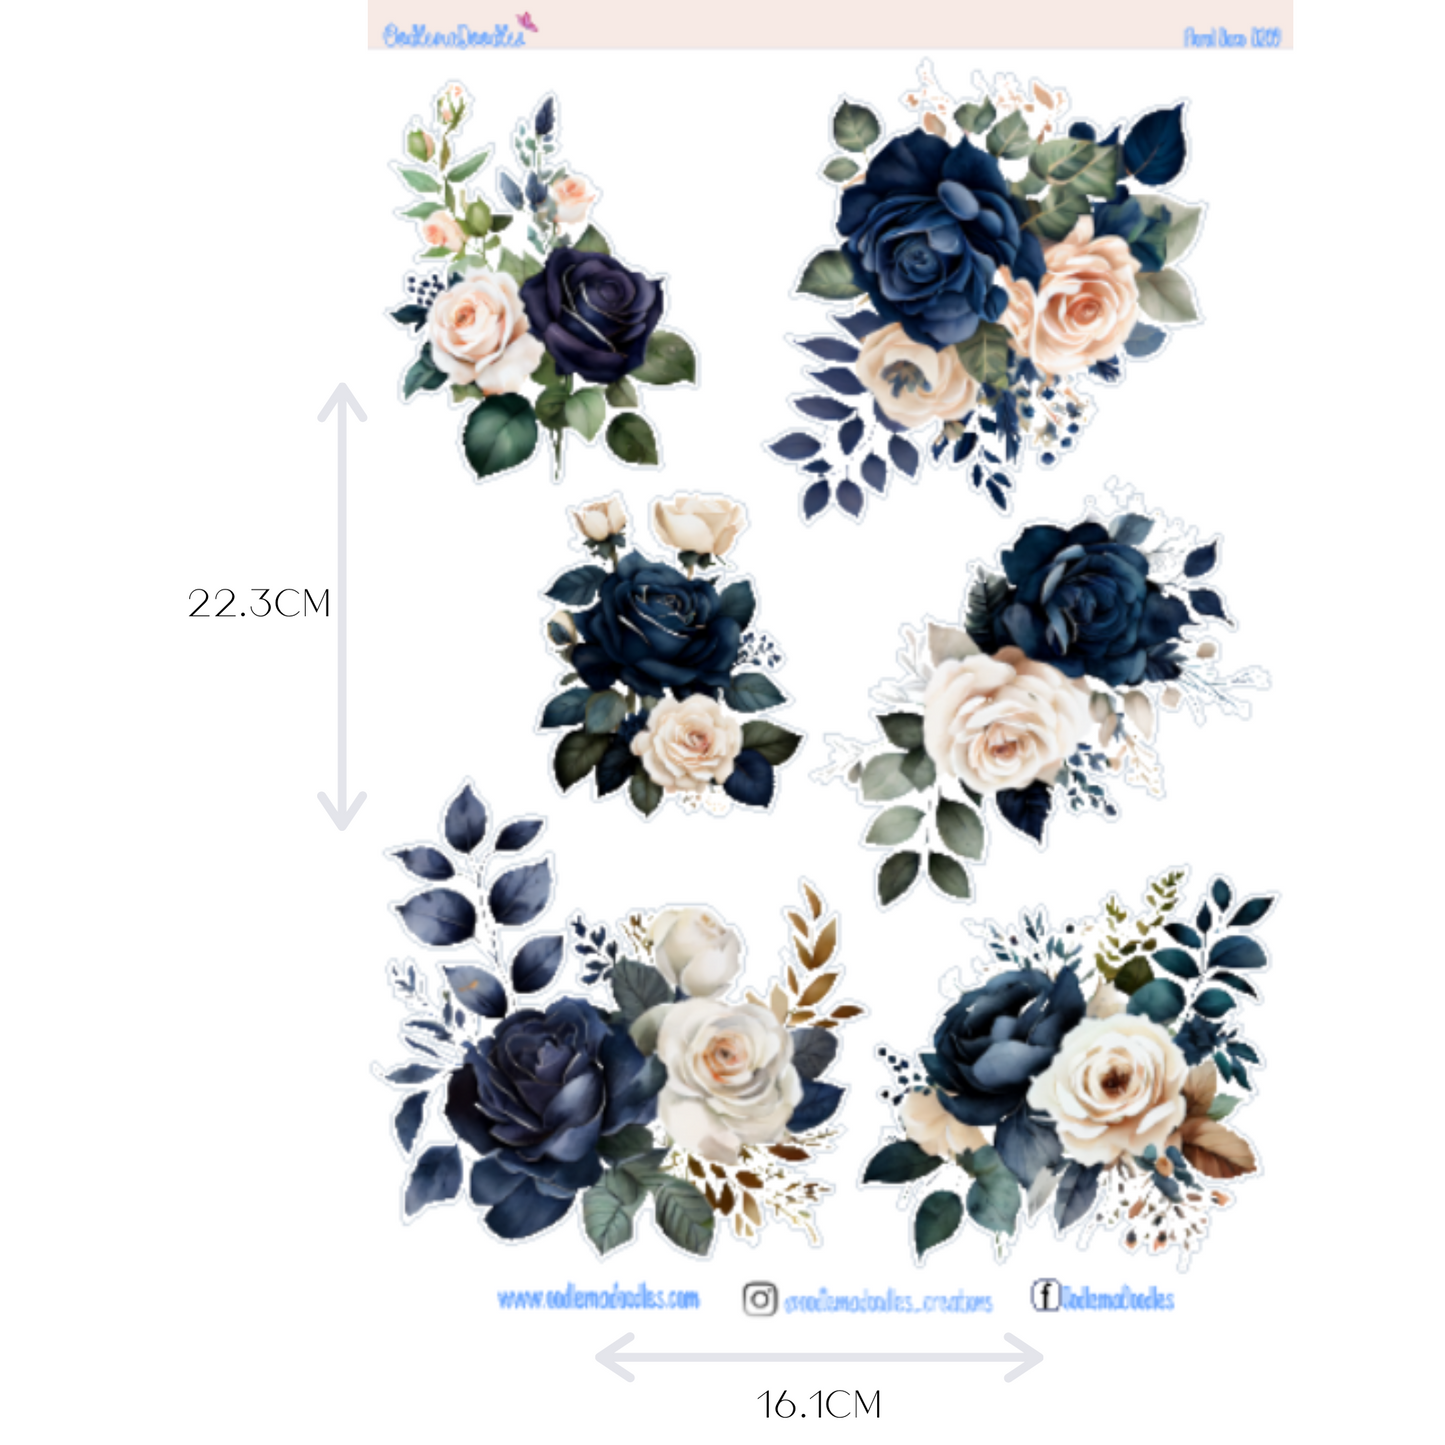 Winter Amour Flower Large Decorative Planner Stickers